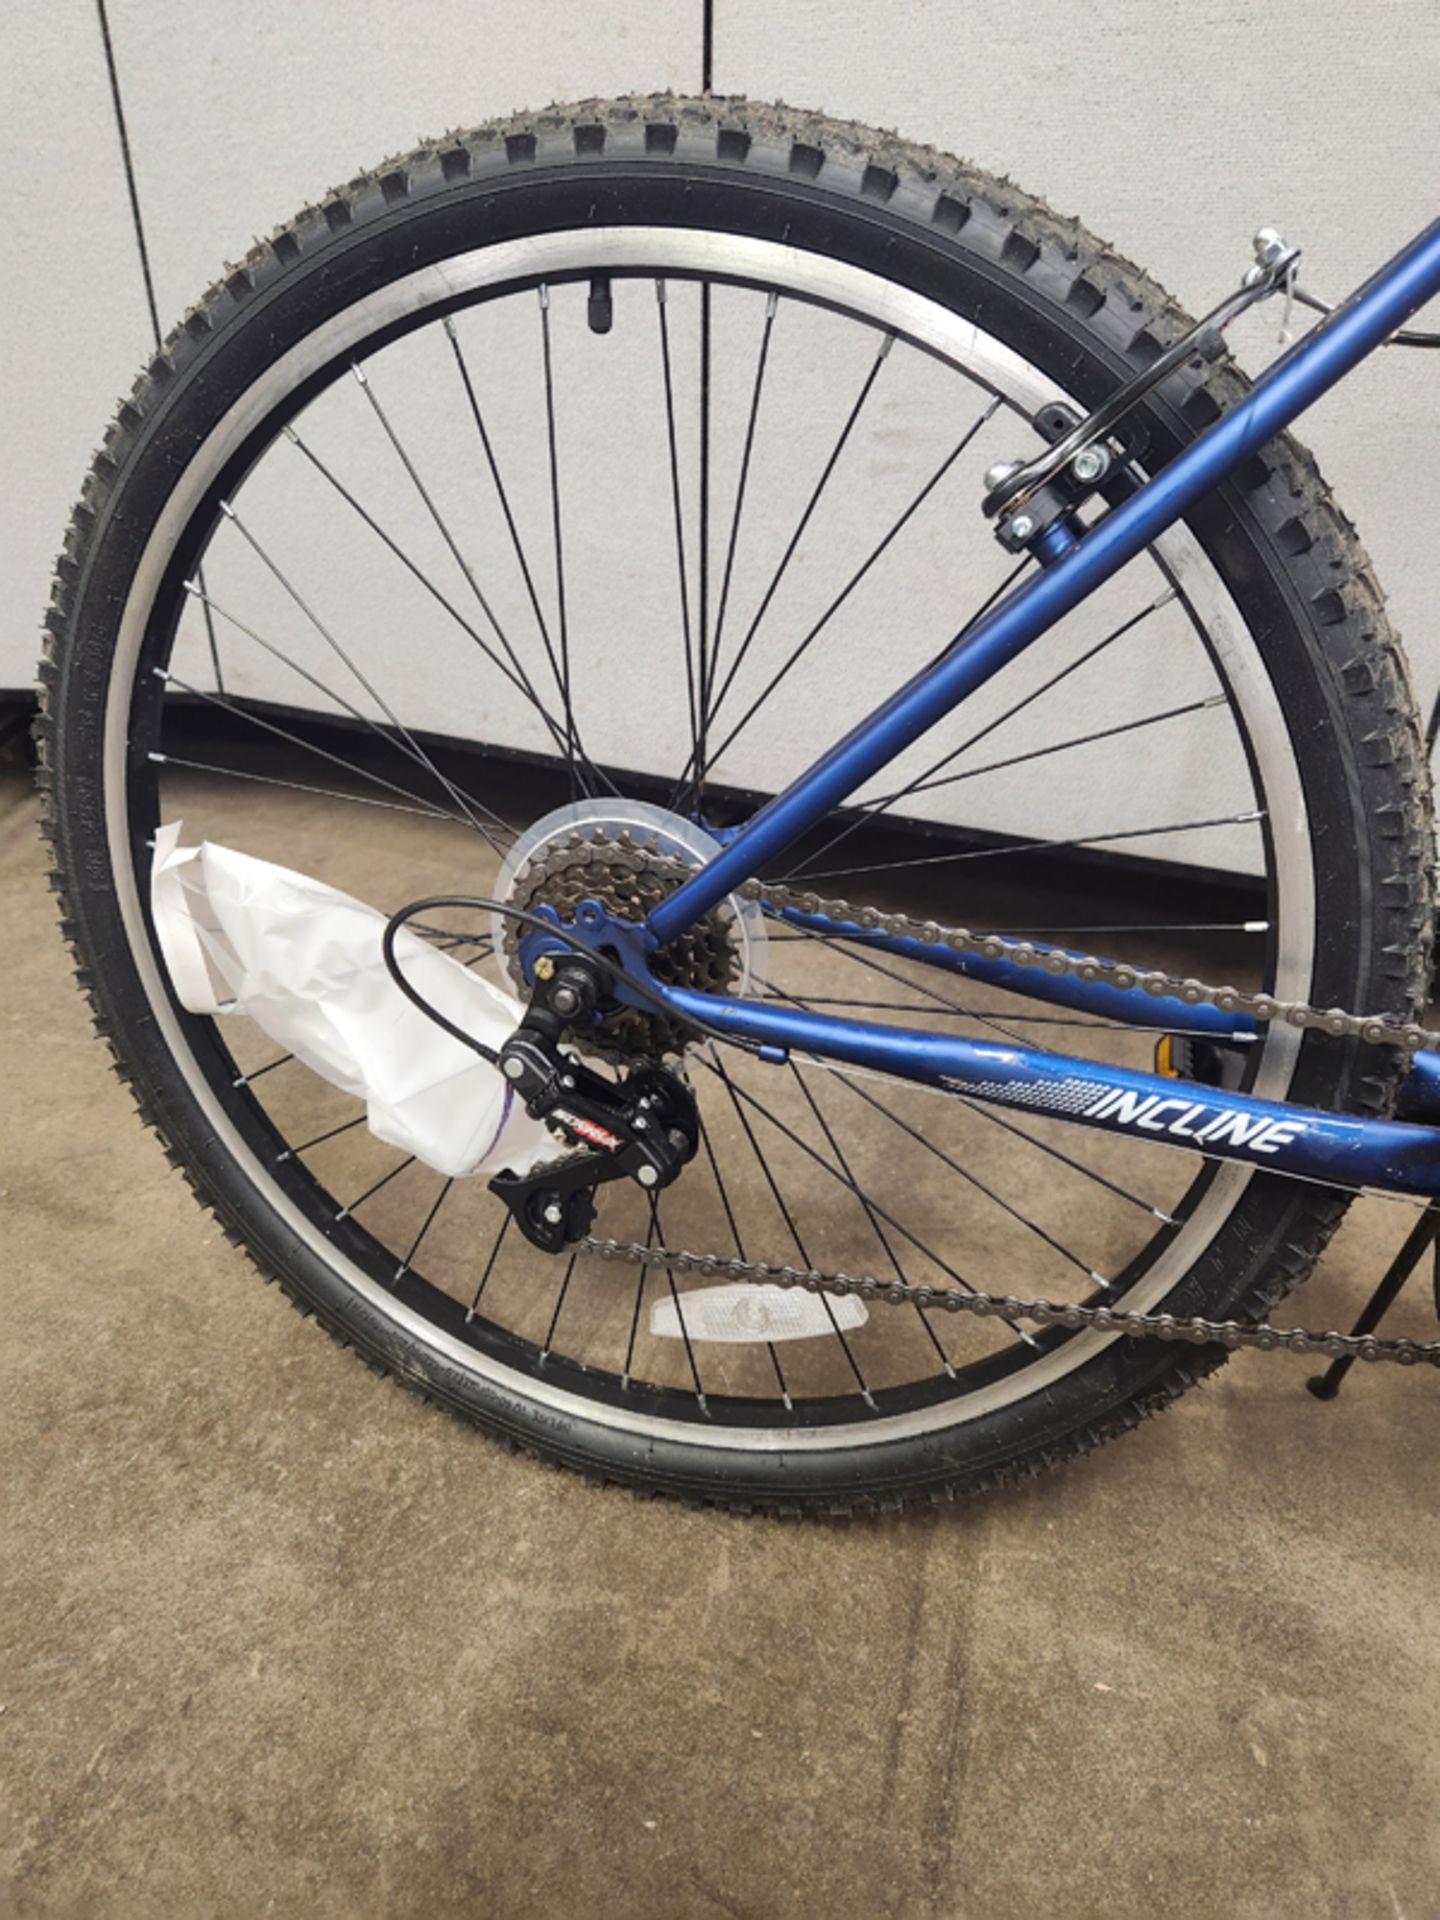 HUFFY 26" INCLINE BICYCLE - SOME DAMAGE TO HANDLE BARS - Image 9 of 9